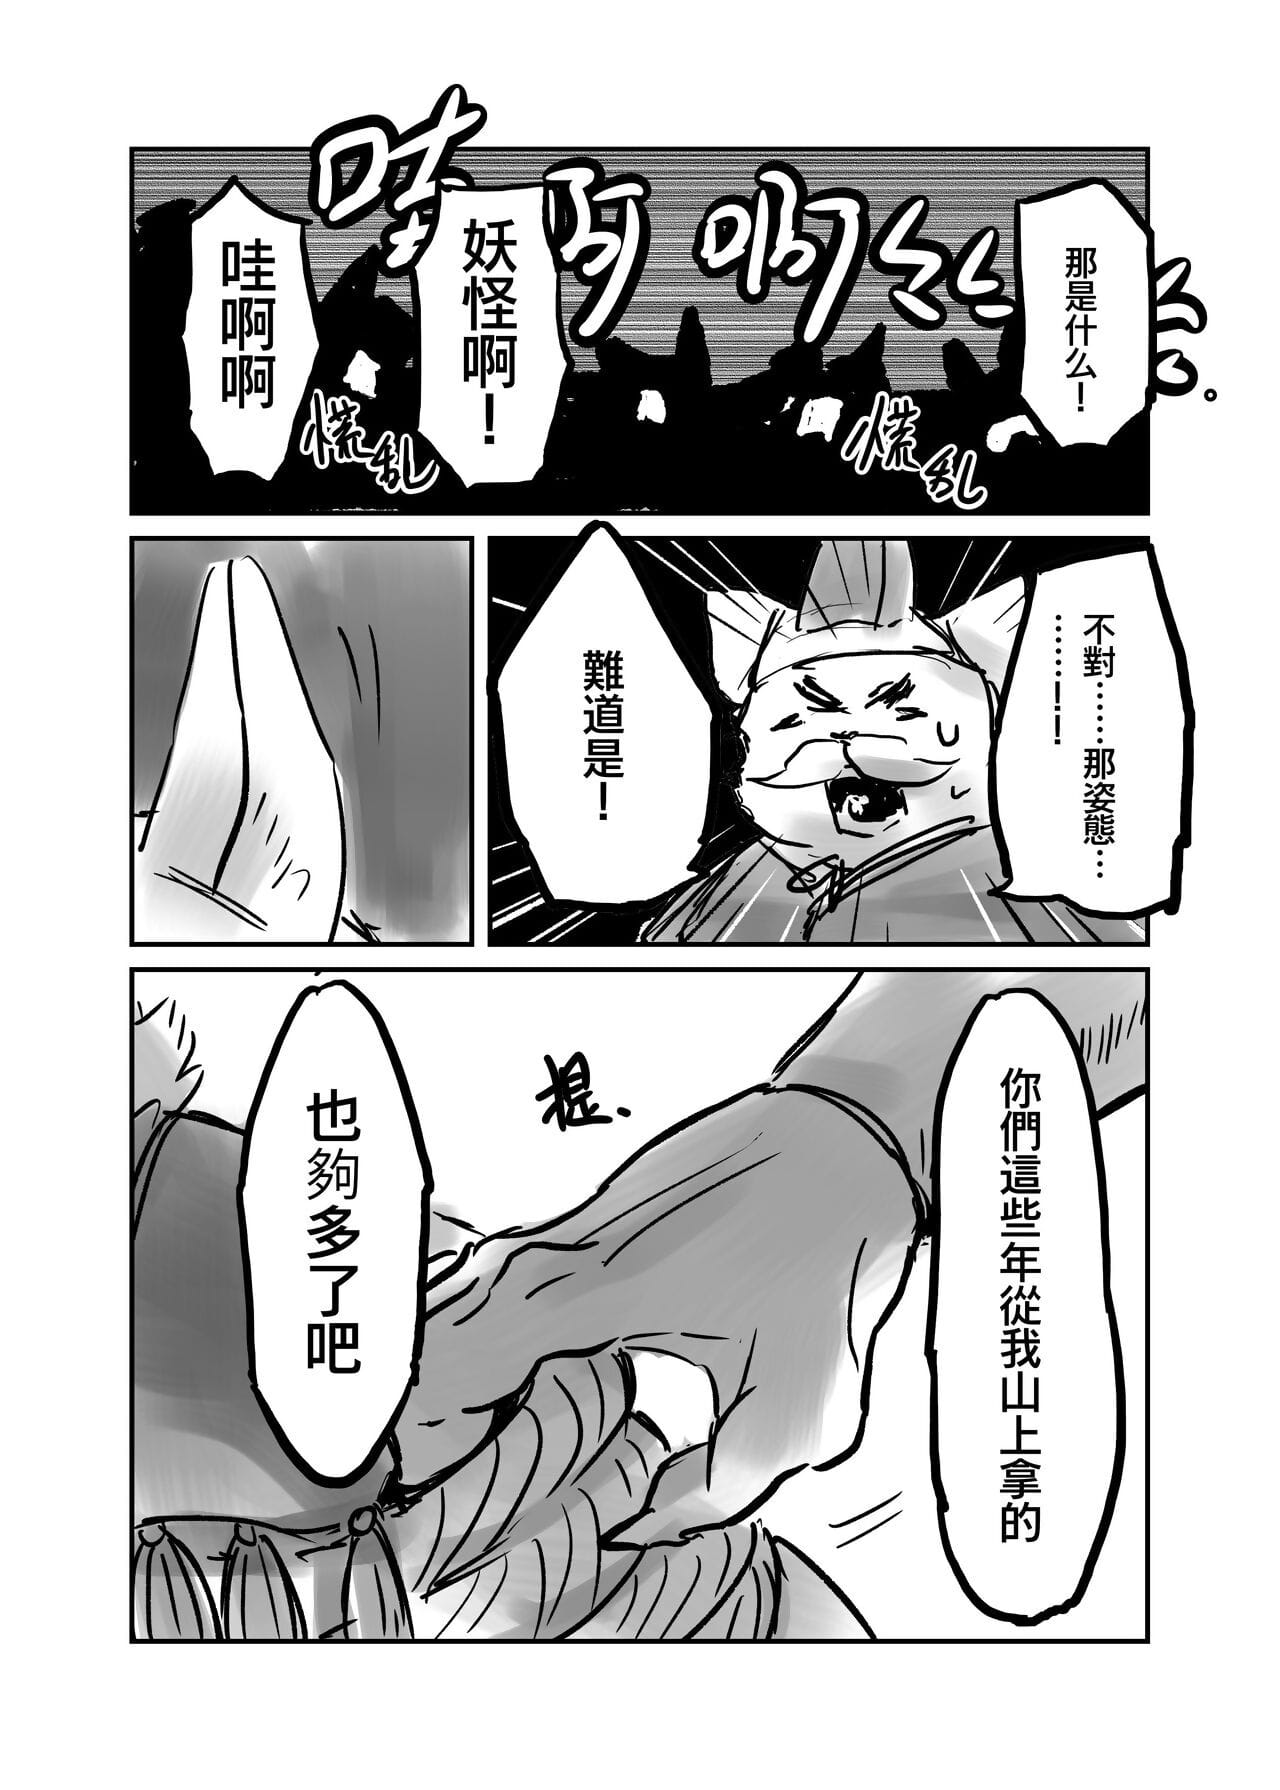 （the visitante 他乡之人 by：鬼流 parte 3 page 1